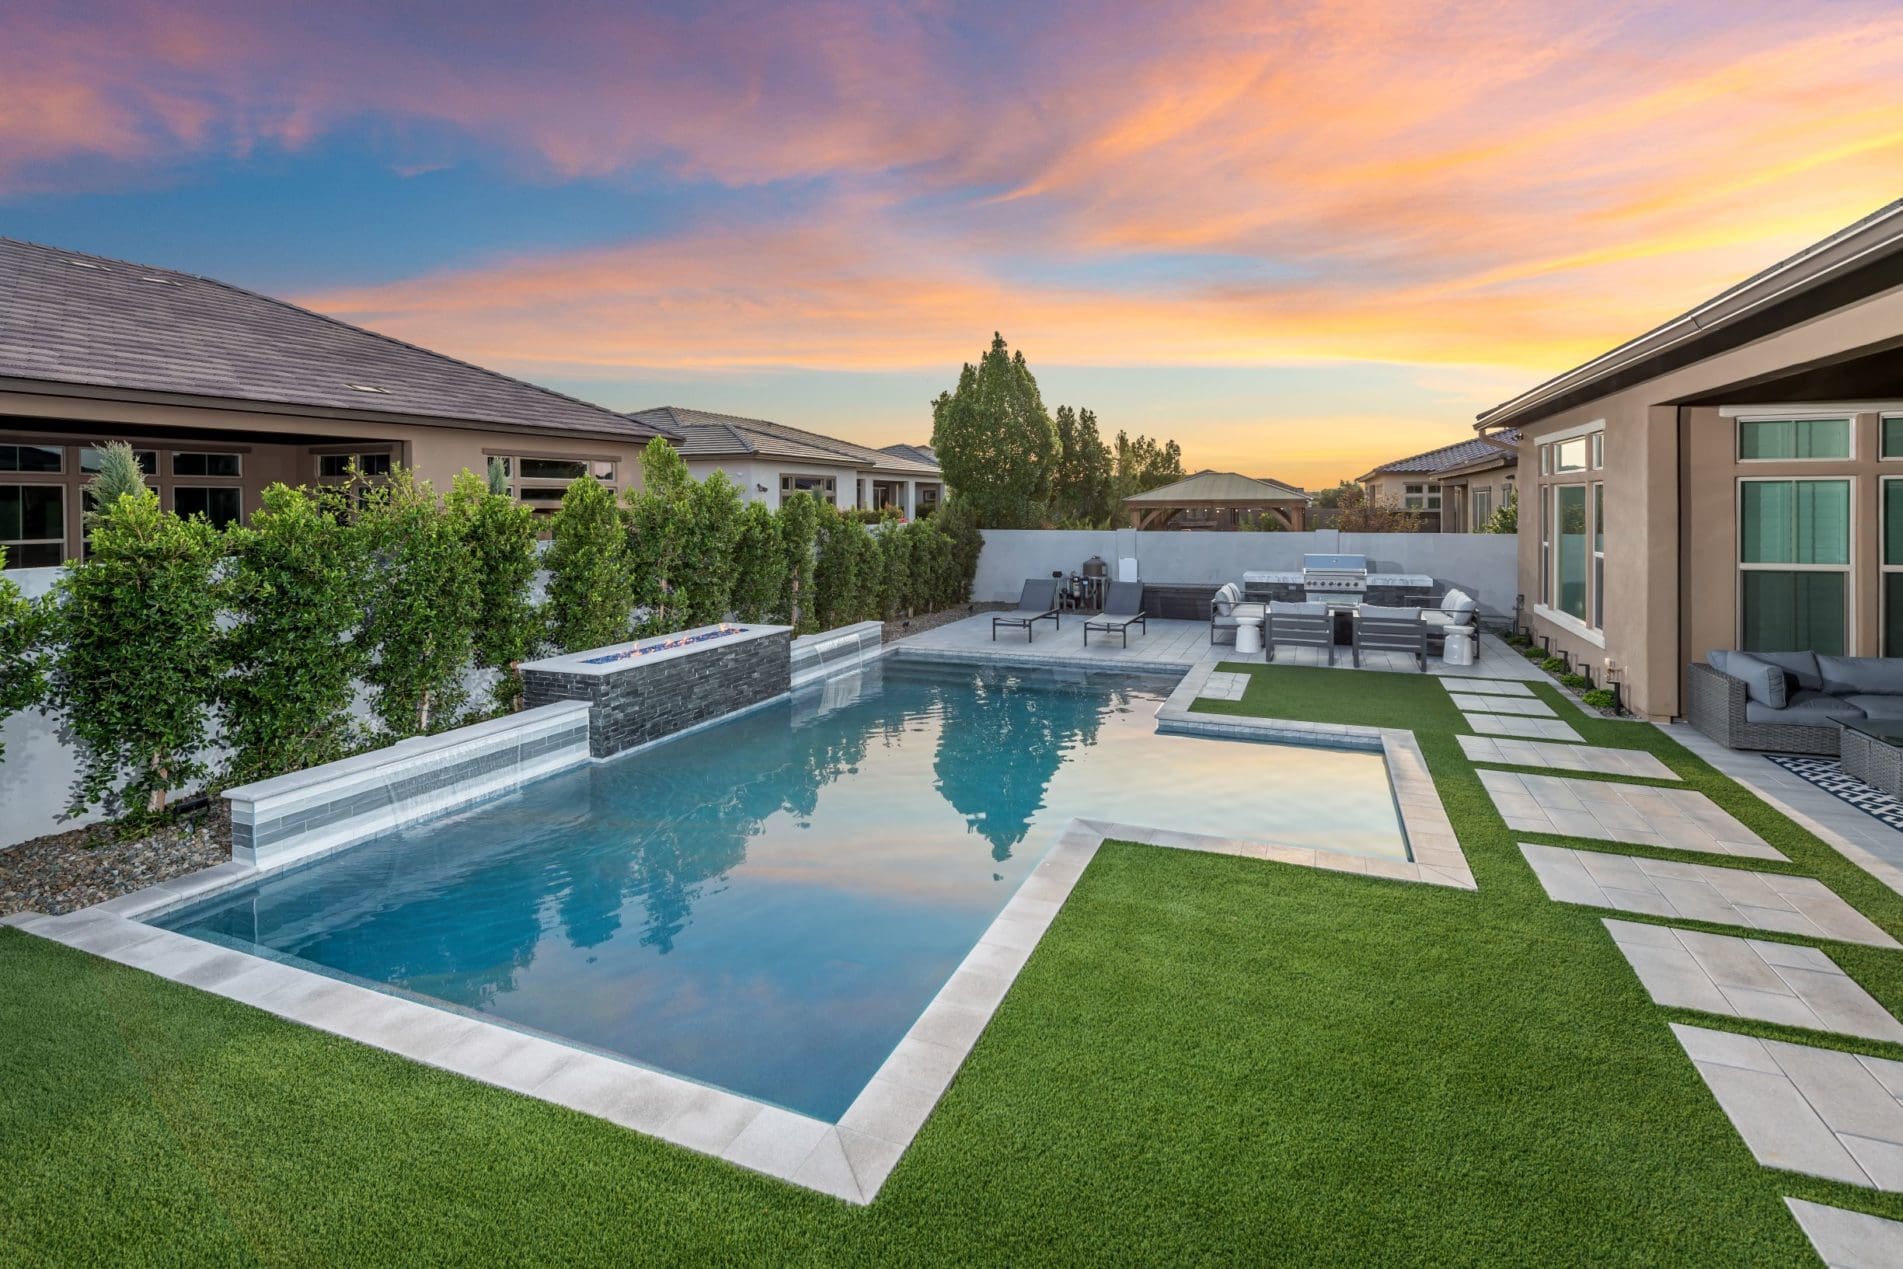 artificial-turf-is-the-new-deck-california-pools-landscape